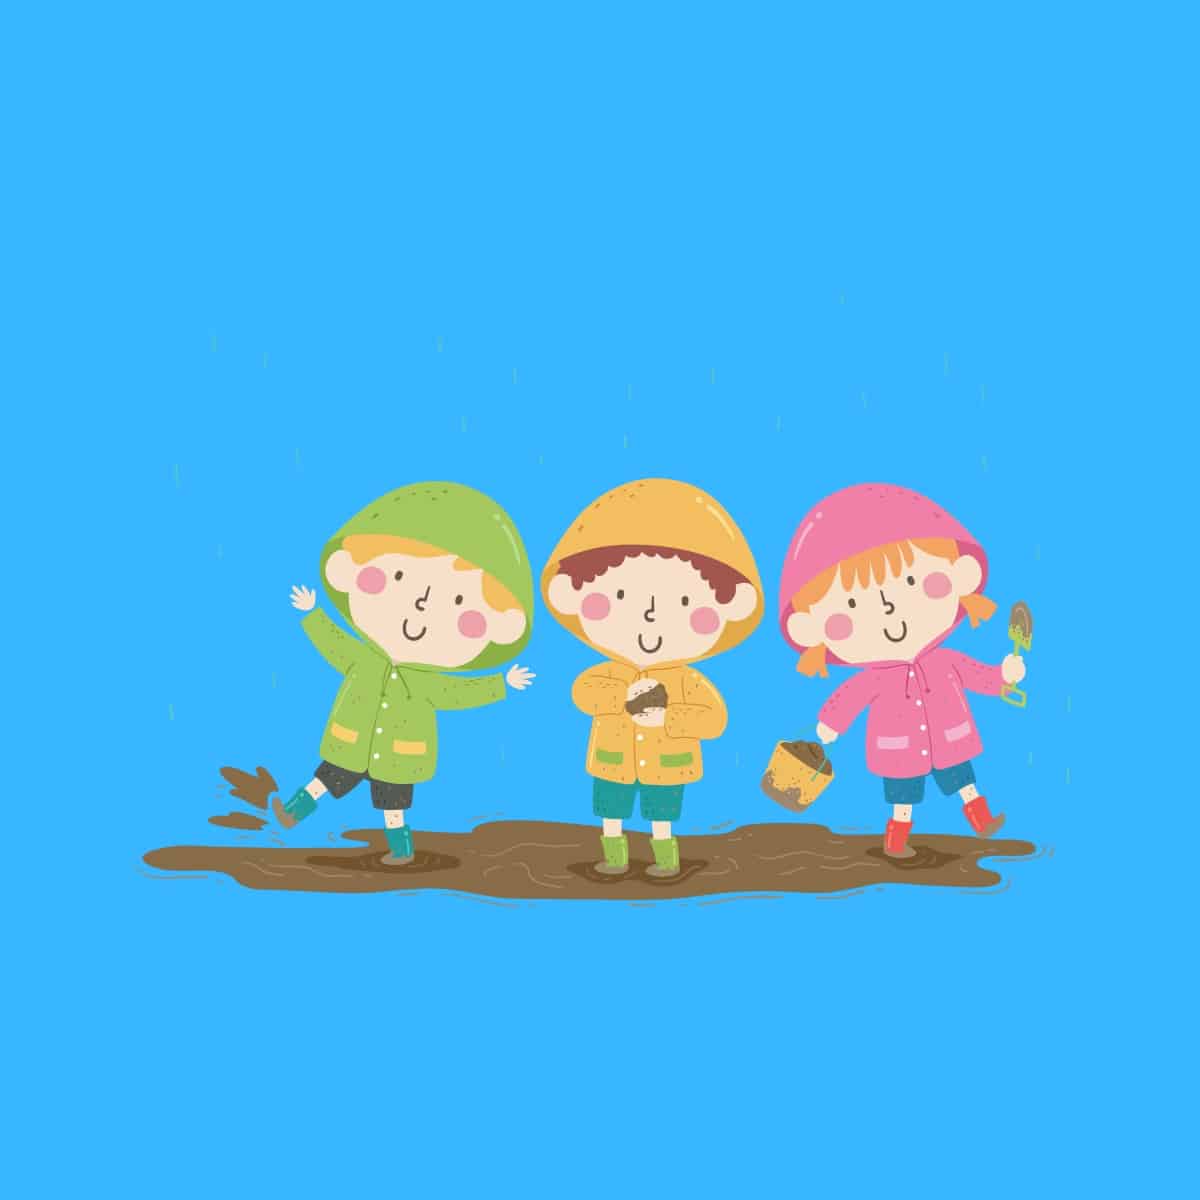 Cartoon graphic of 3 kids playing in mud on a blue background.